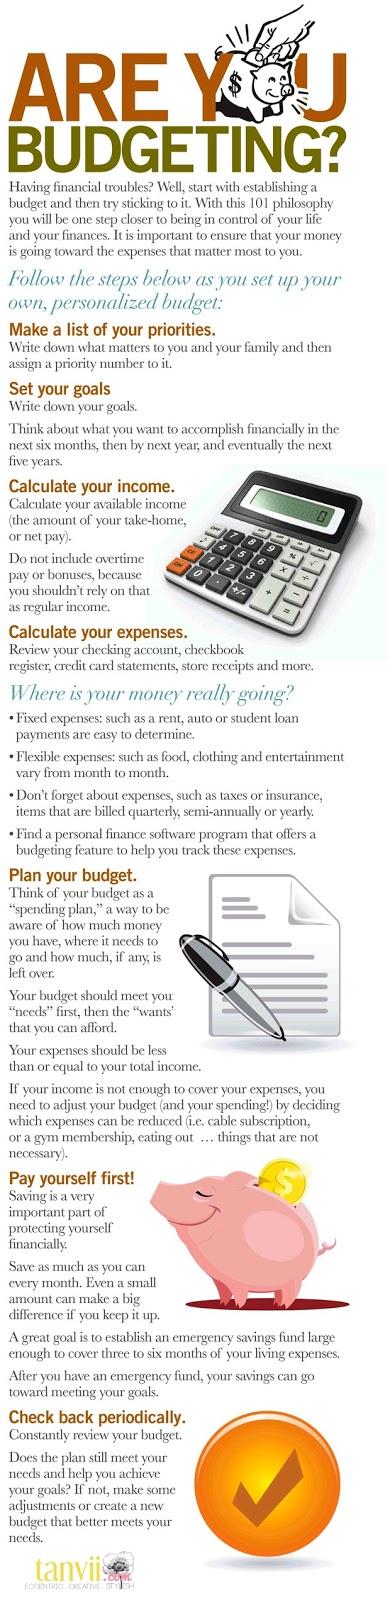 Are you Budgeting?